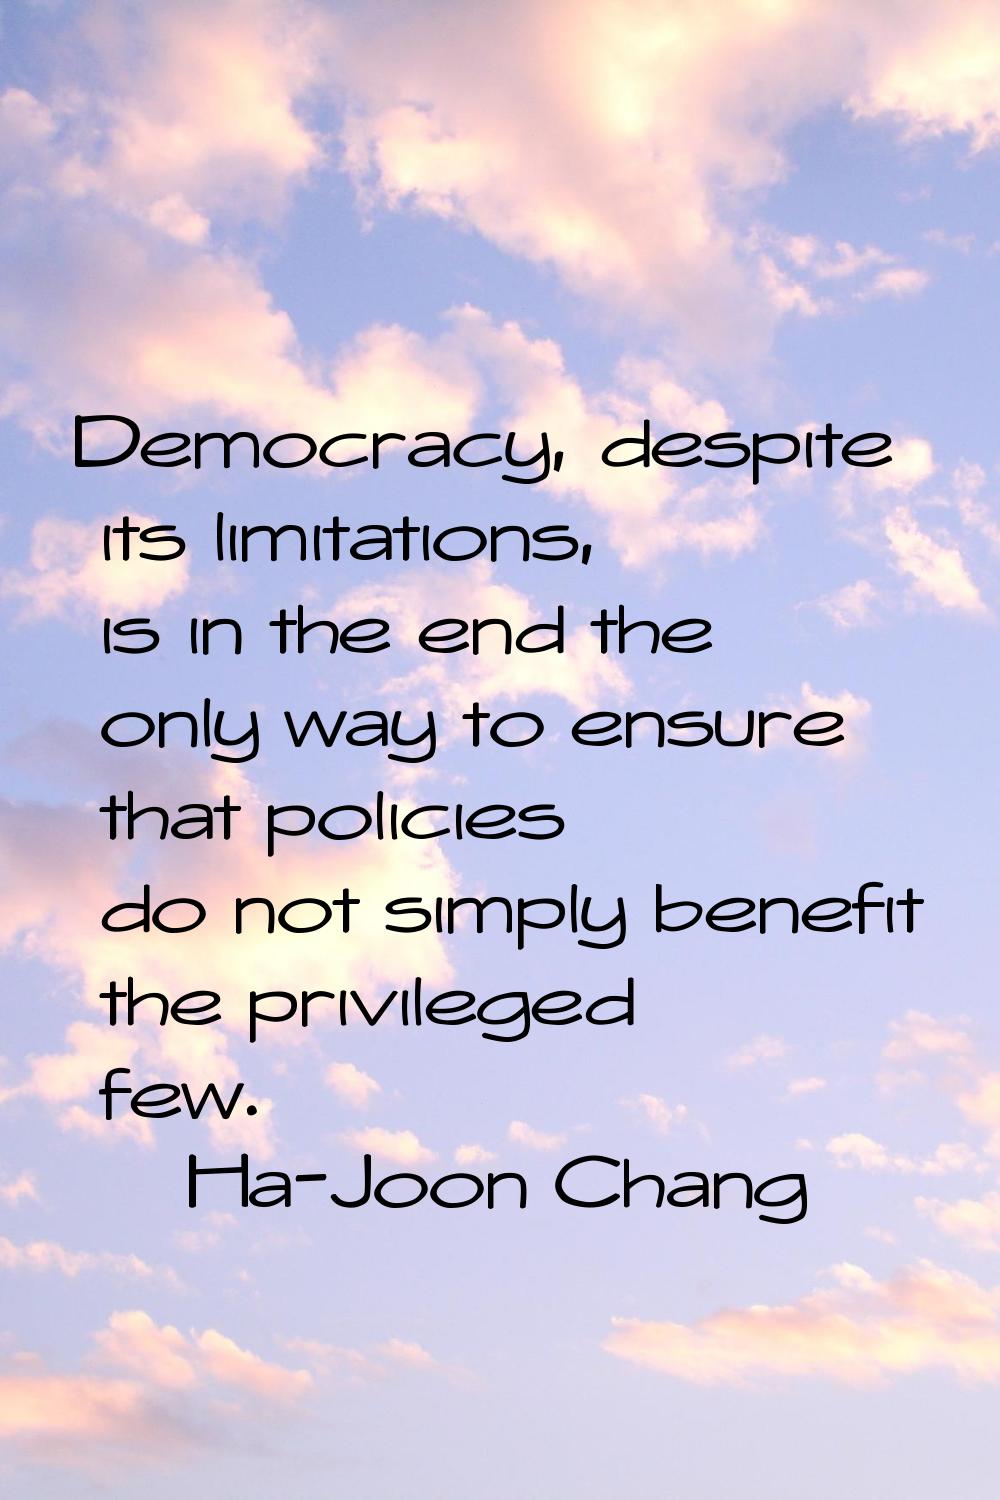 Democracy, despite its limitations, is in the end the only way to ensure that policies do not simpl